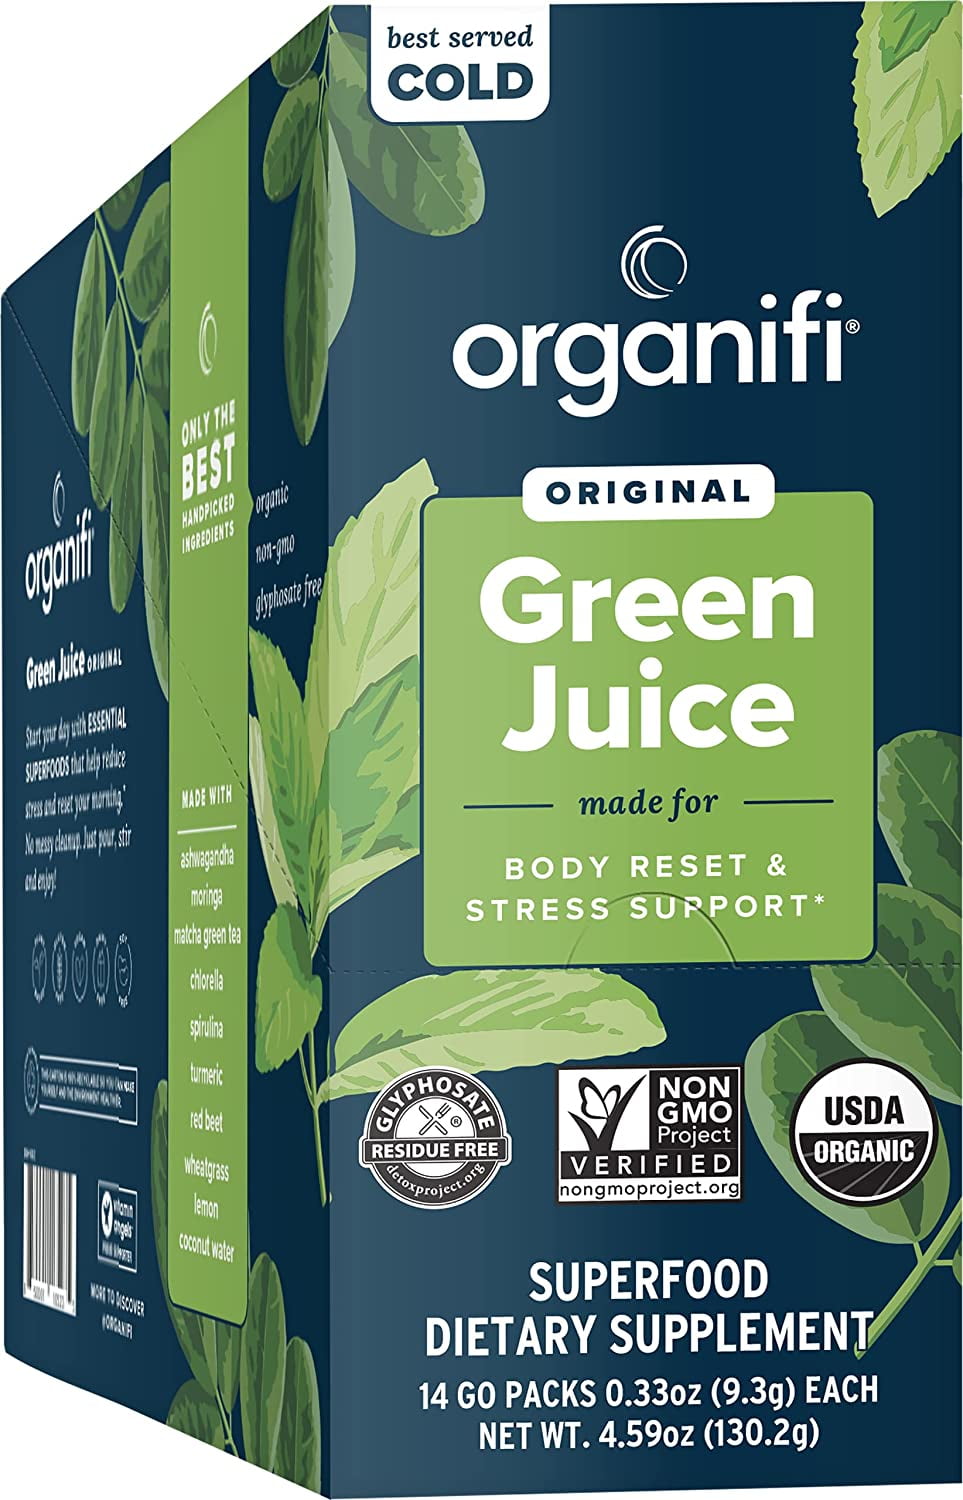 The Facts About Organifi Green Juice (Label) - Nih Office Of Dietary Supplements Revealed